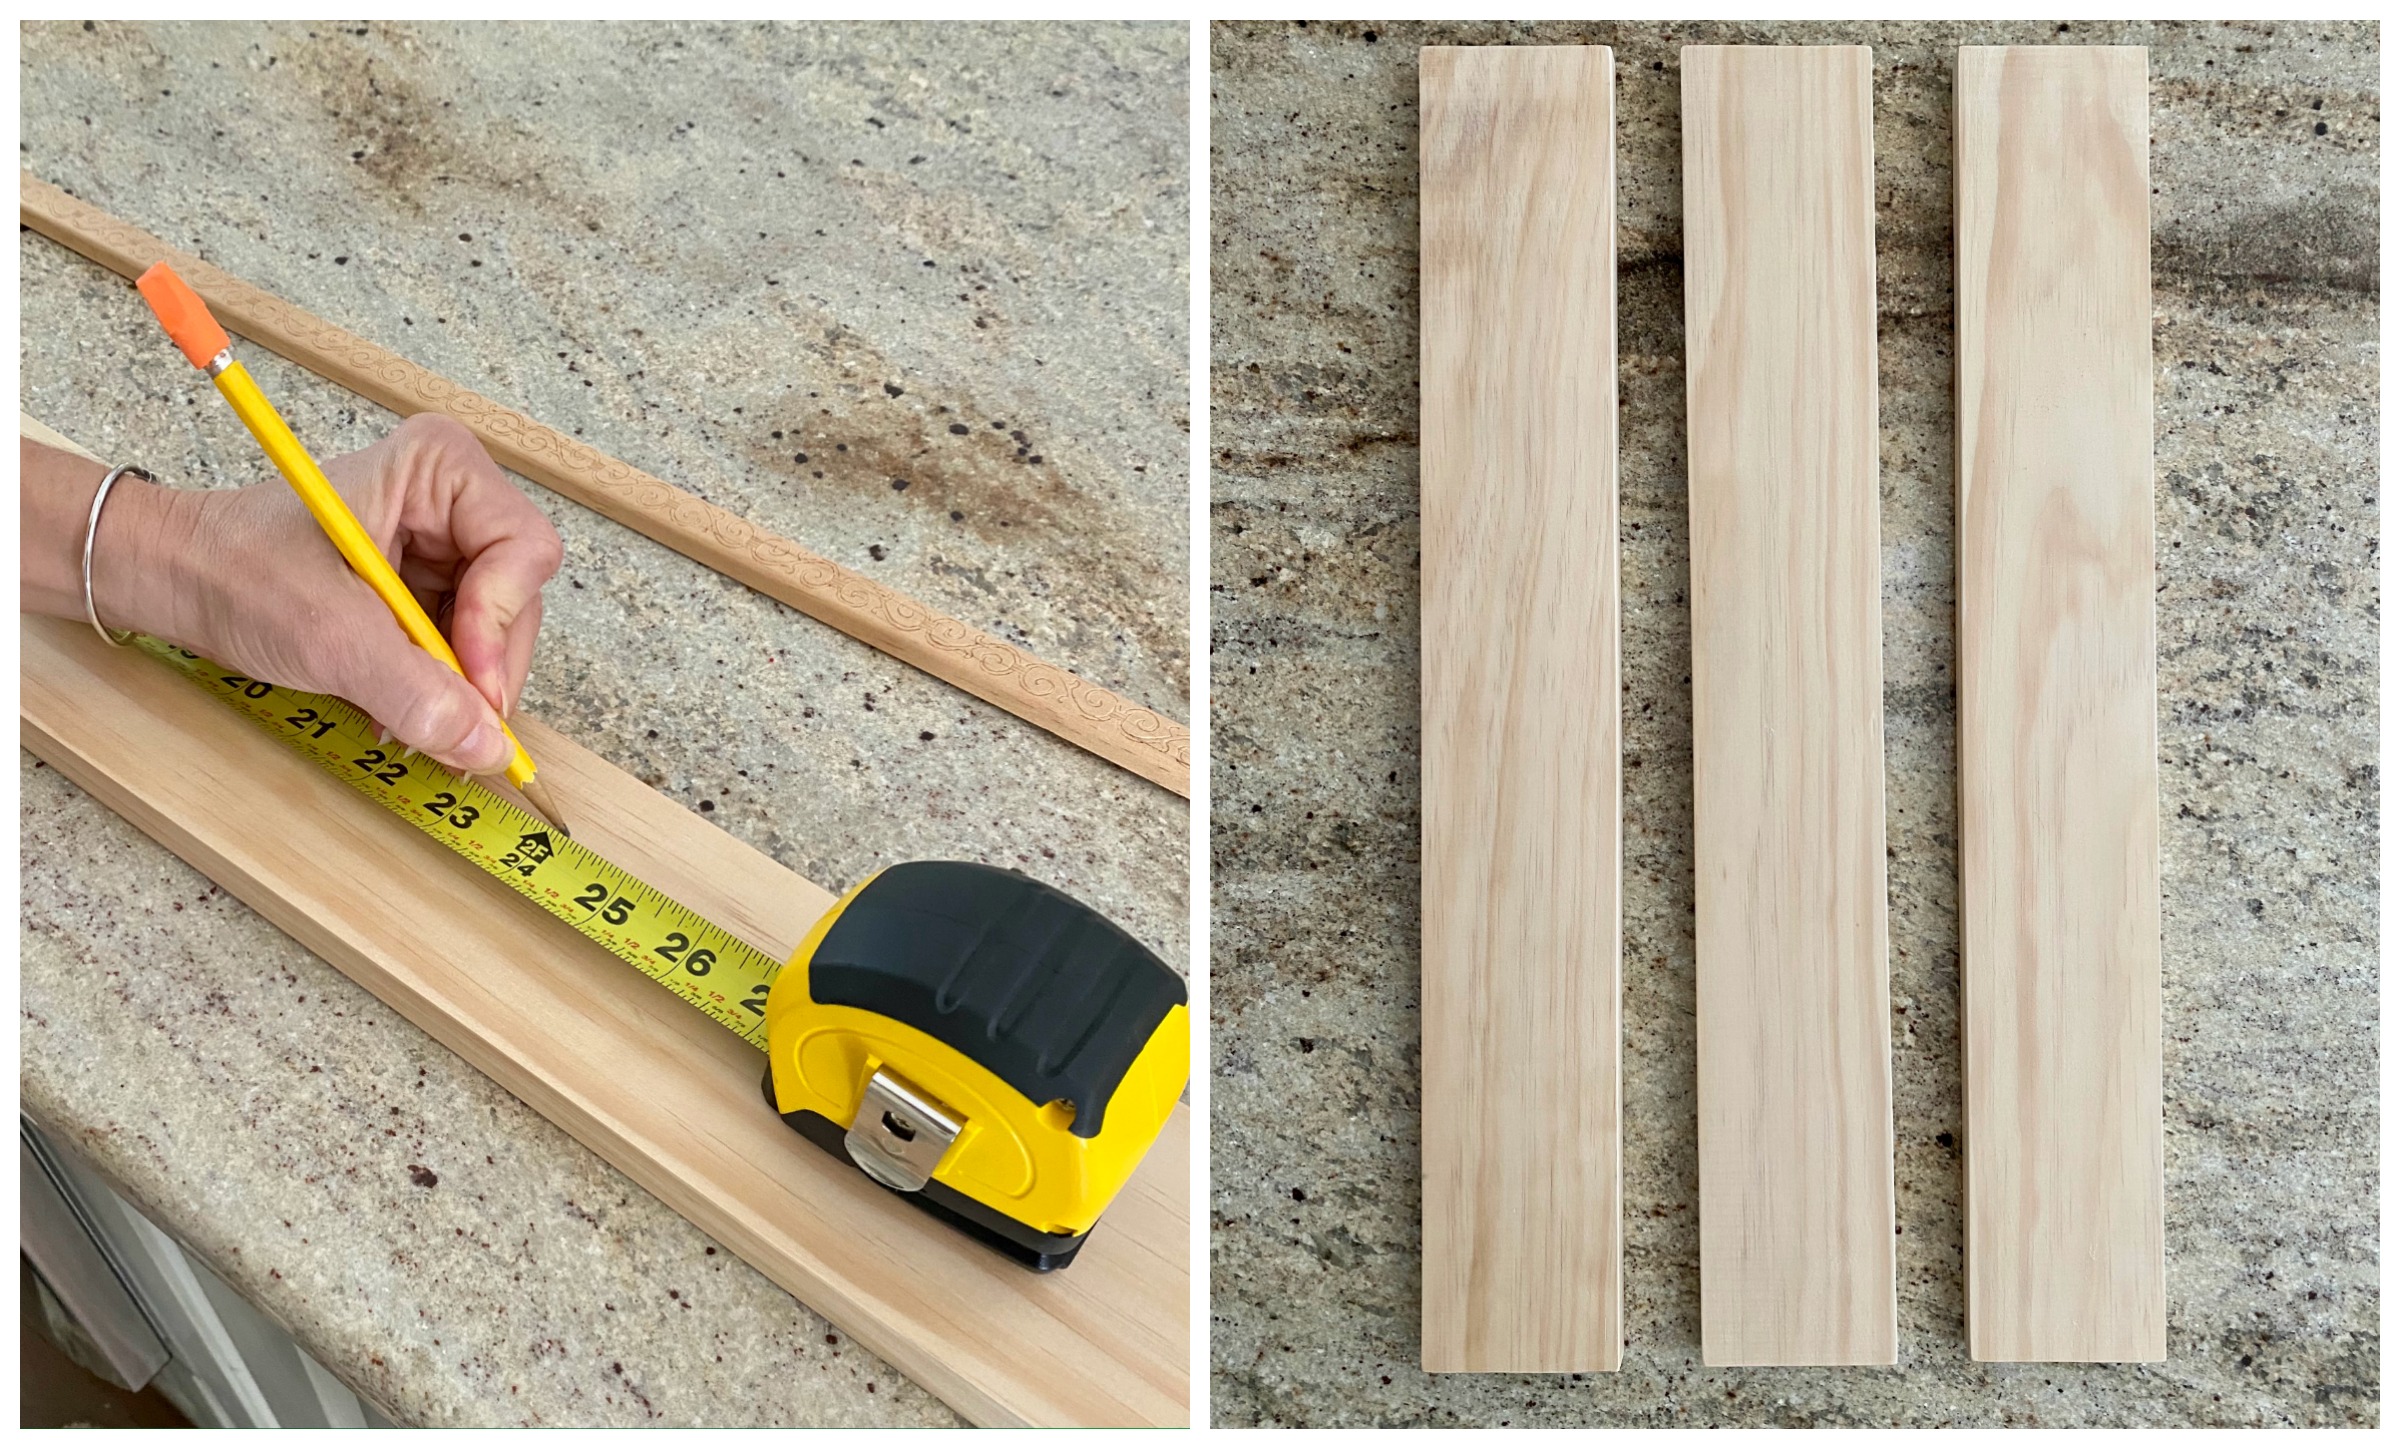 Measuring boards for the DIY Wood Farmhouse Tray bottom with a pencil and measuring tape.